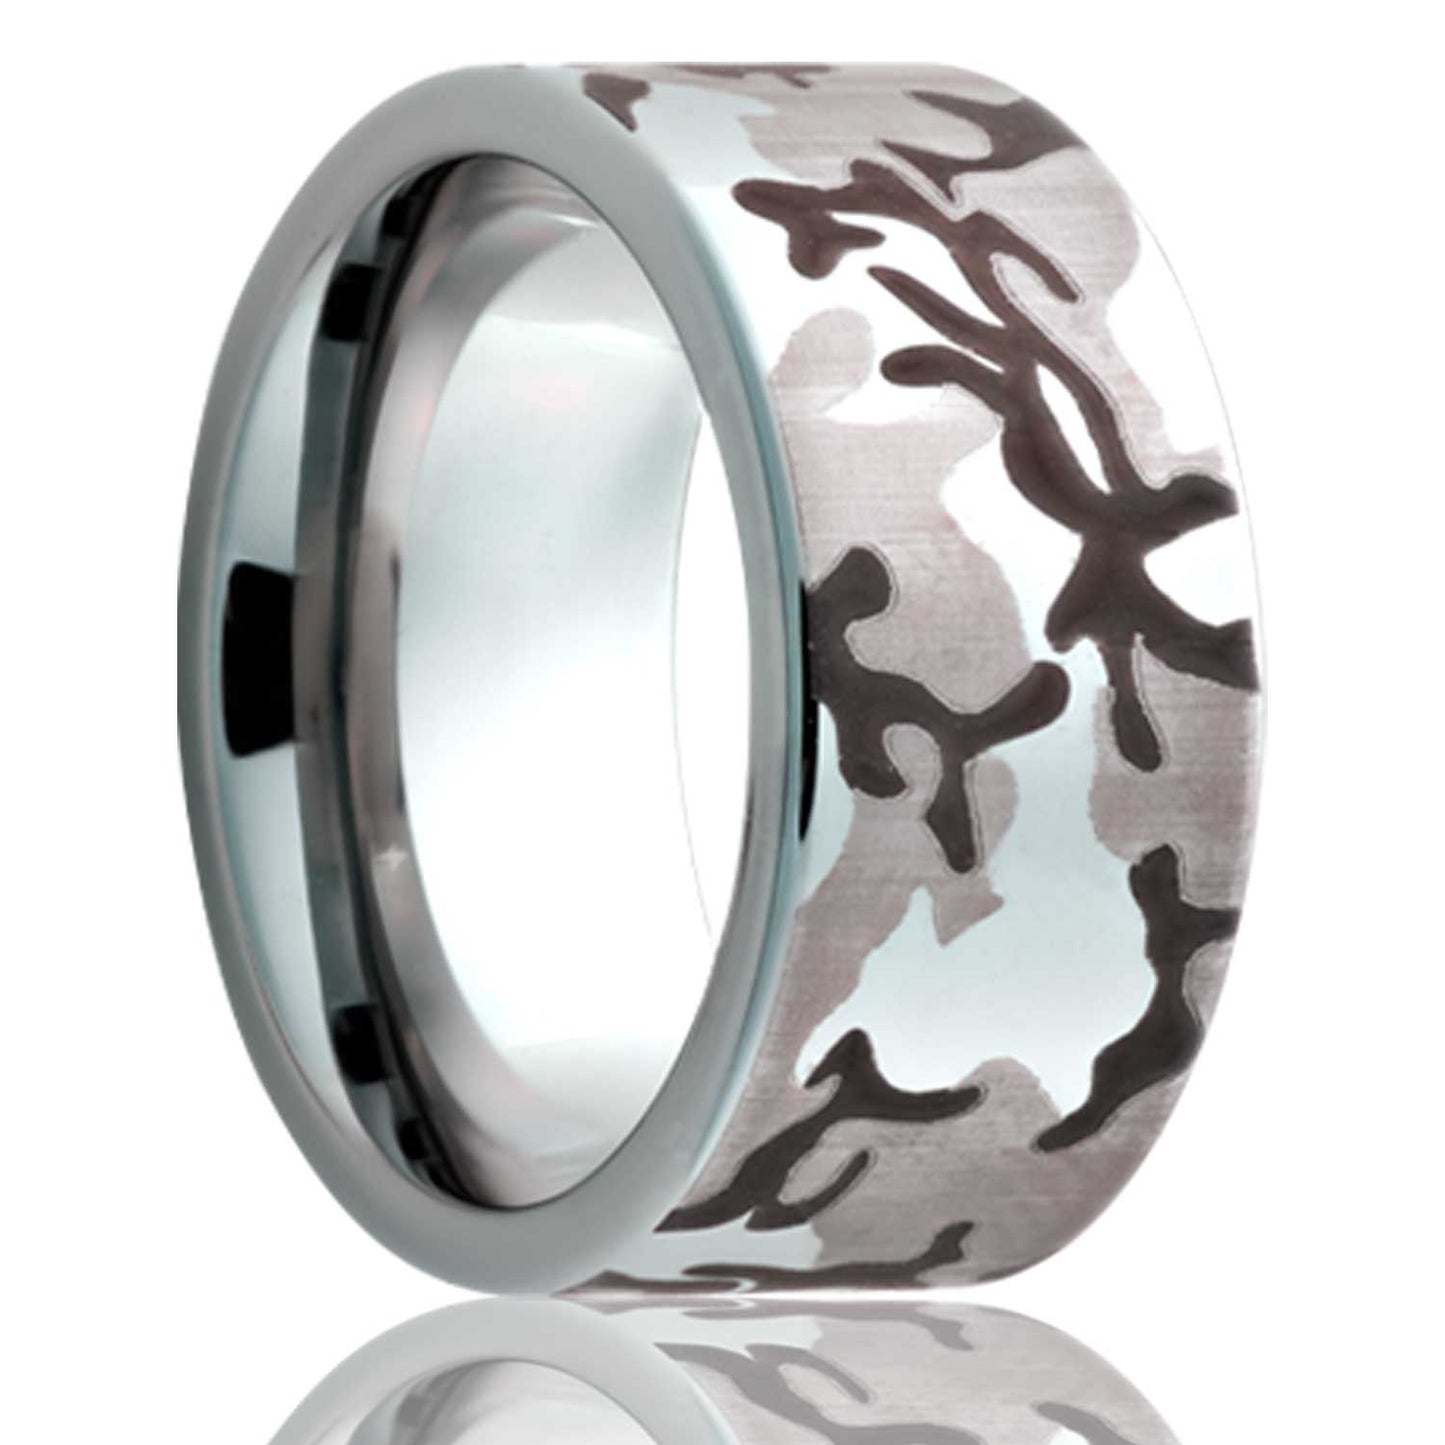 A engraved camo titanium wedding band displayed on a neutral white background.